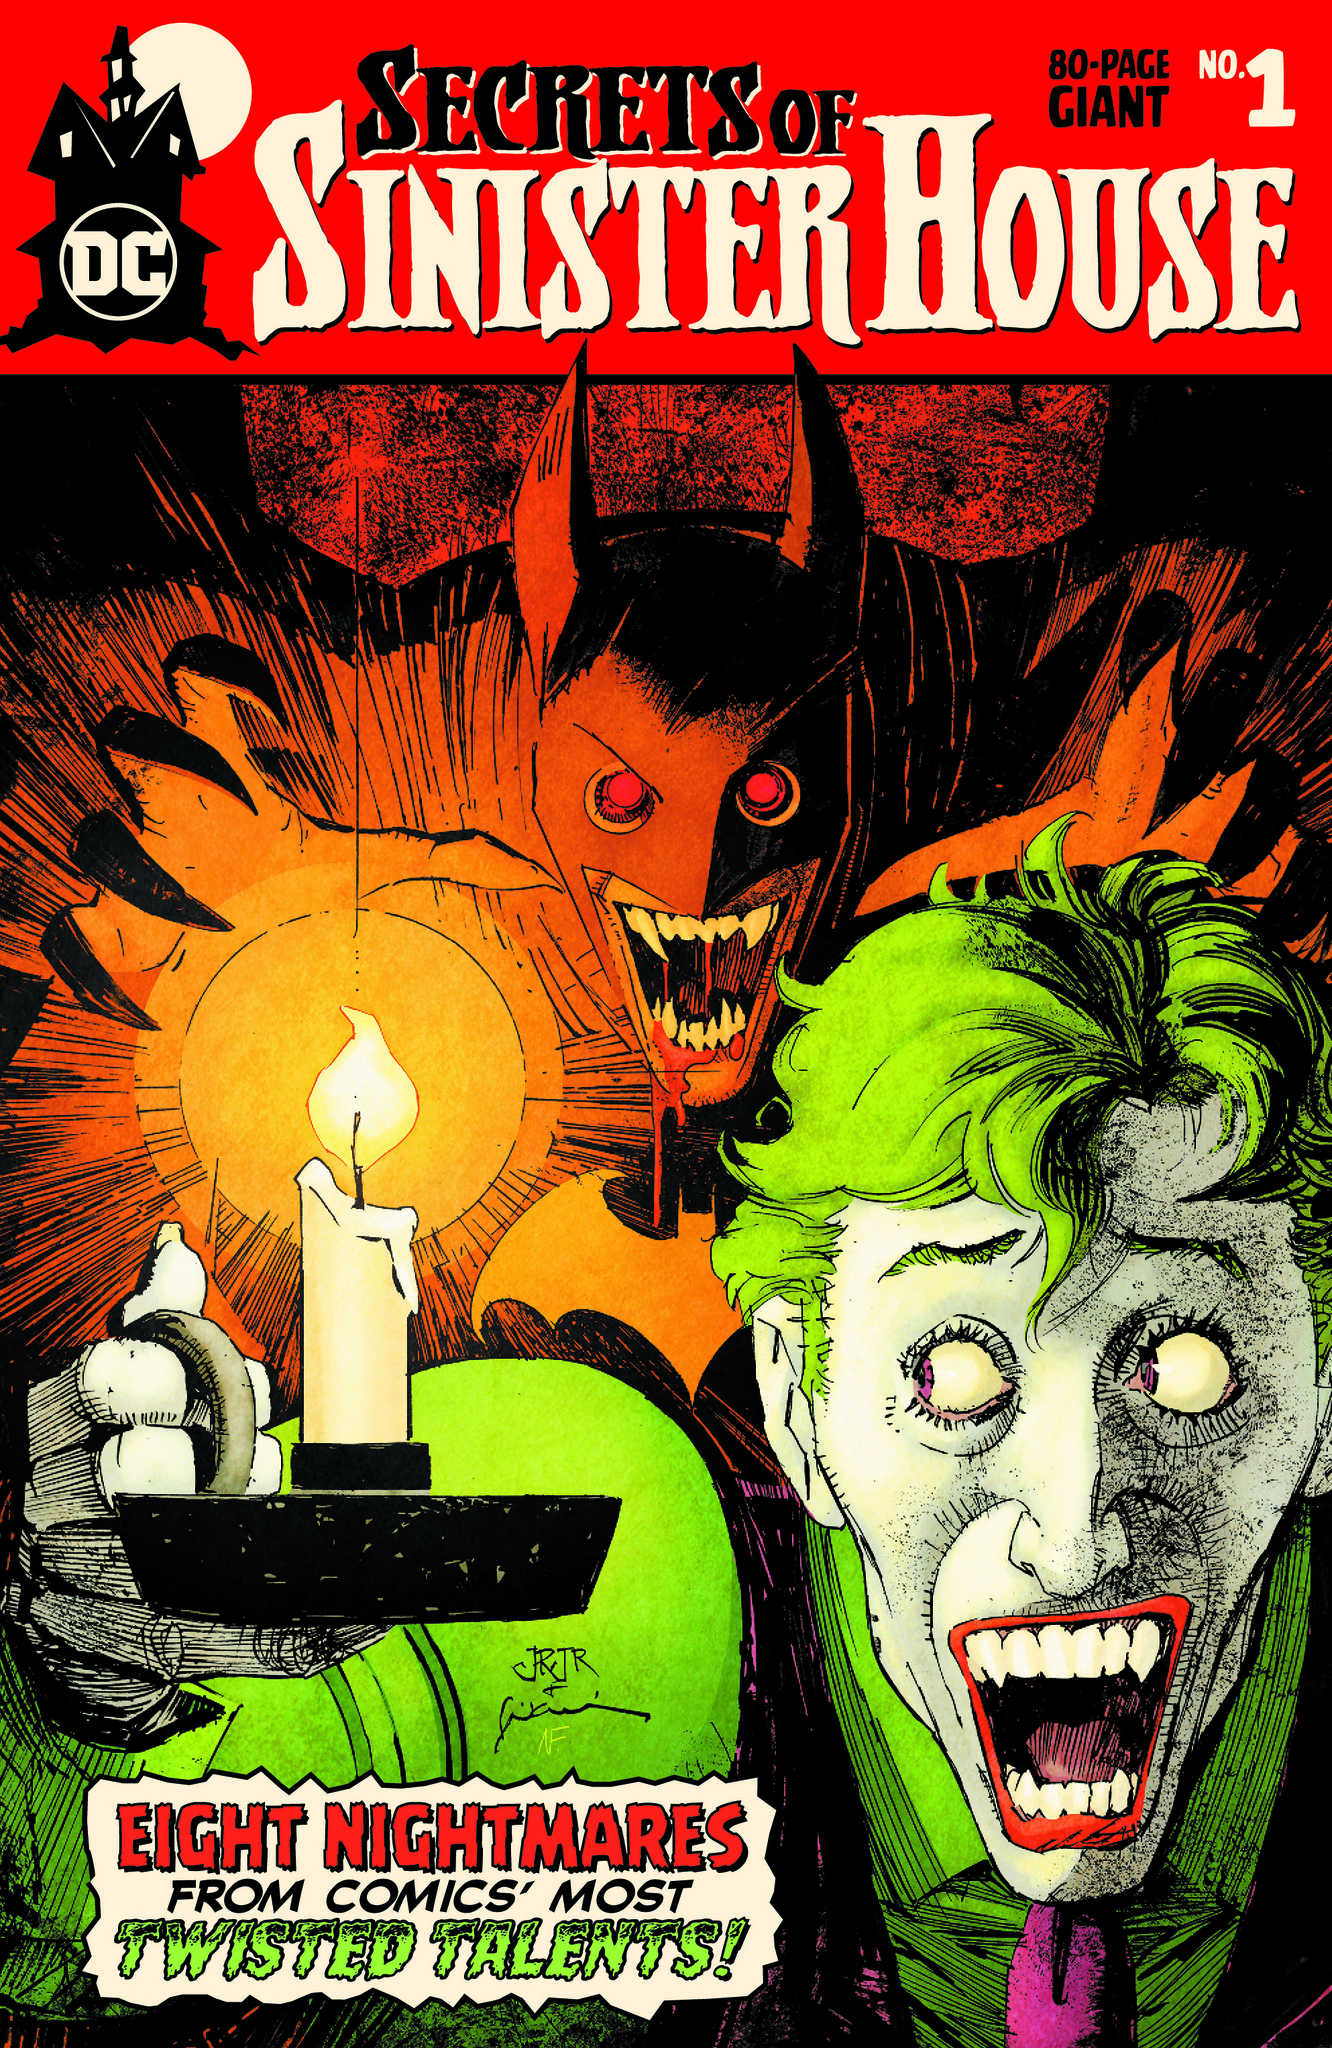 Secrets of Sinister House #1 review: one hell of an anthology from DC